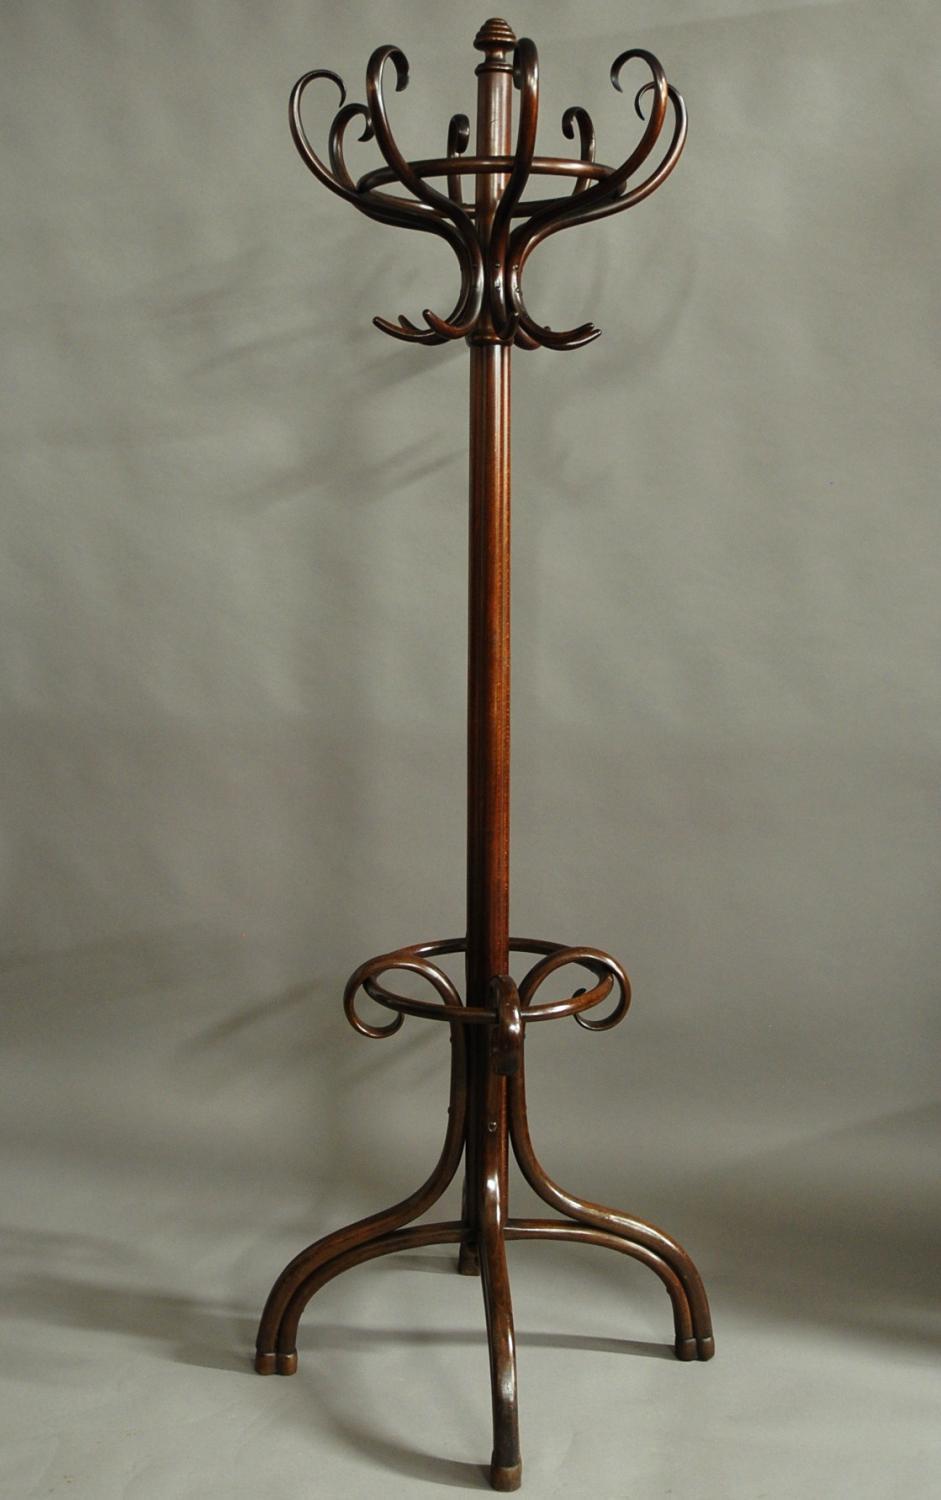 Edwardian bentwood hat & coat stand by Thonet